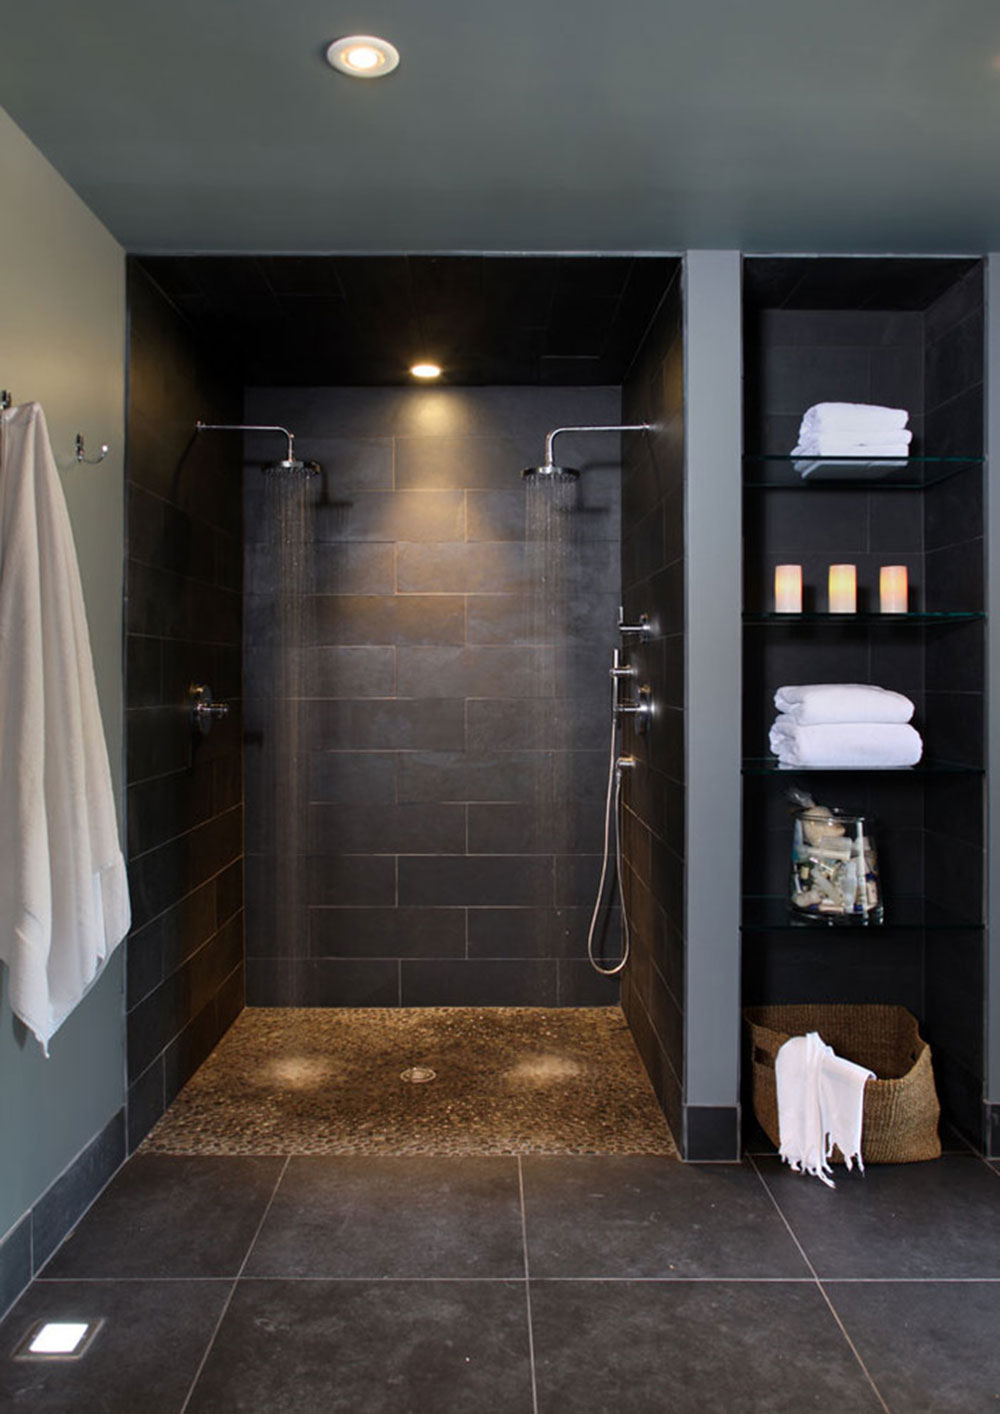 Bathroom-basement-by-NF-interiors Small bathroom remodel tips to do it properly